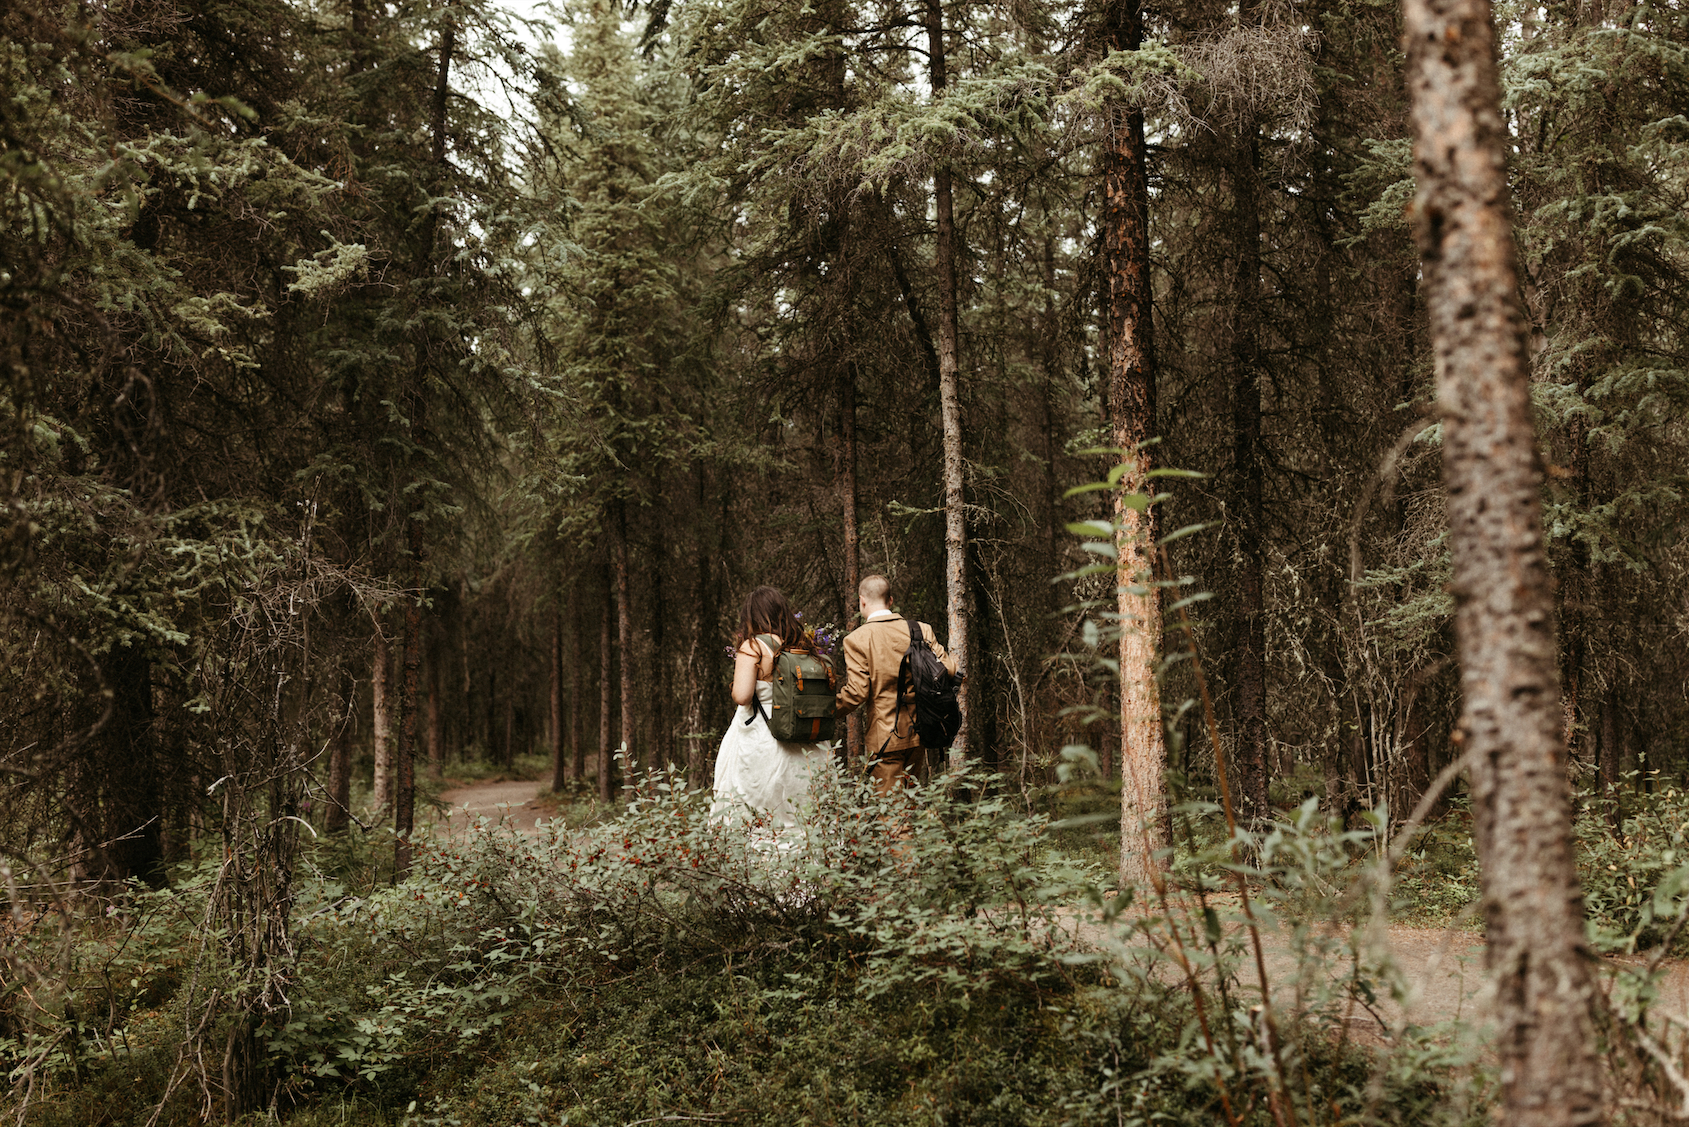 Couple walking in wedding attire through the woods.